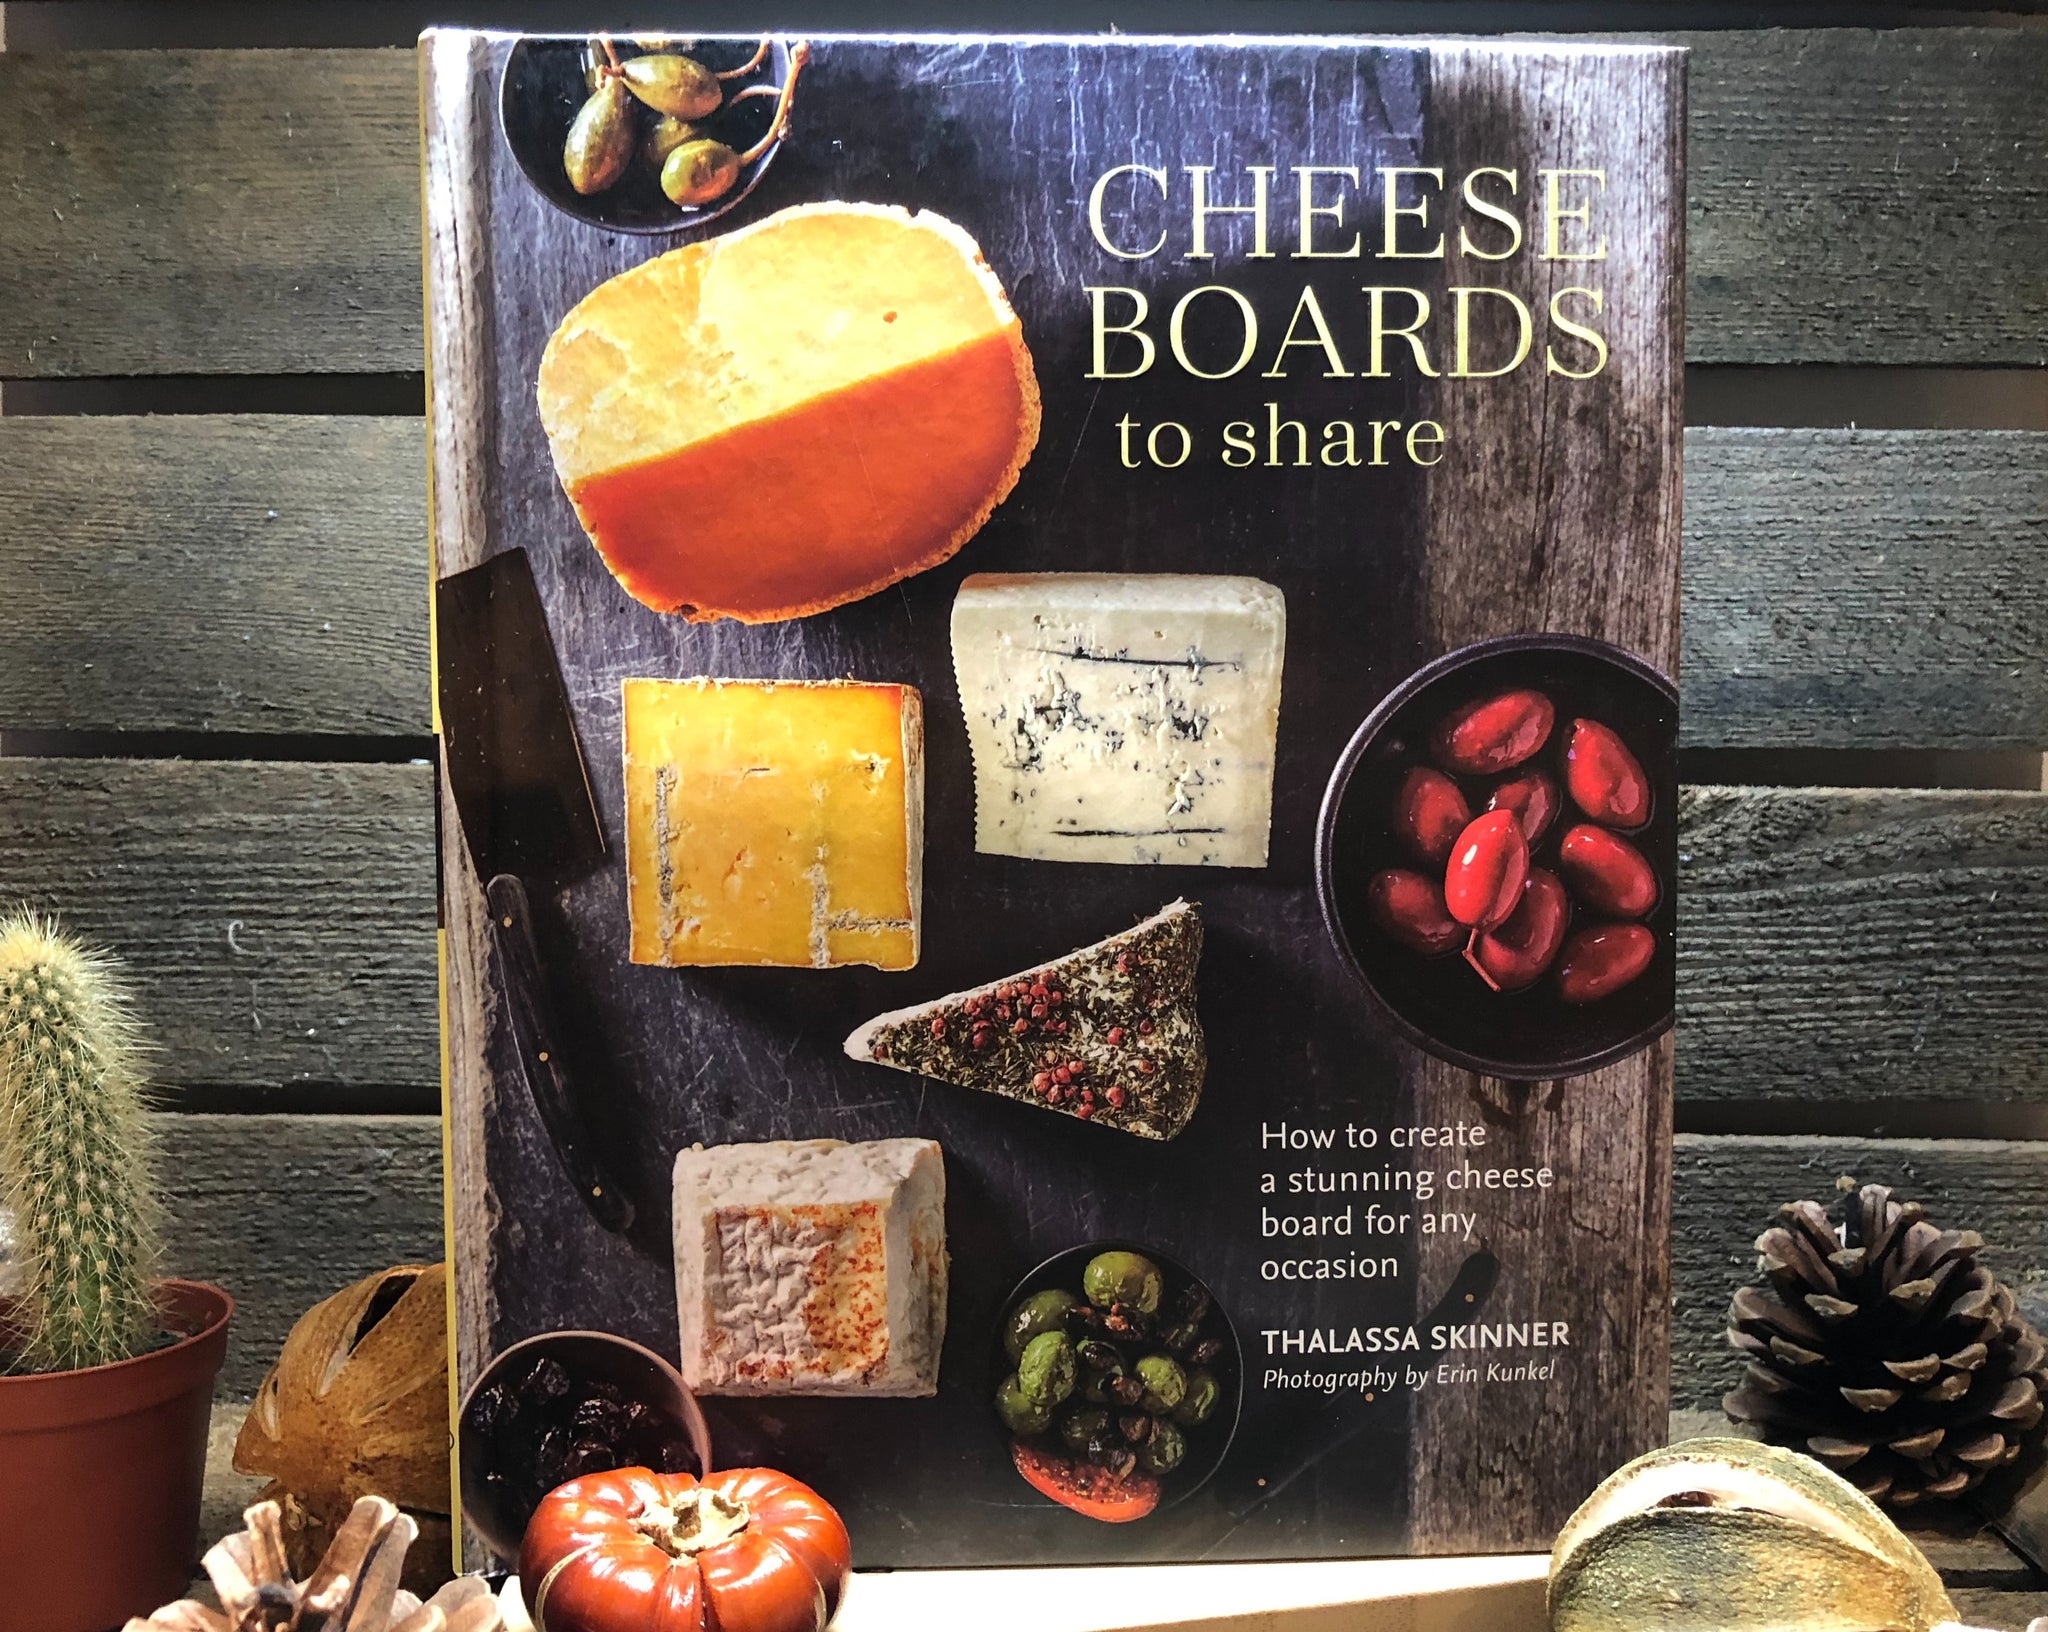 CHEESEBOARDS TO SHARE